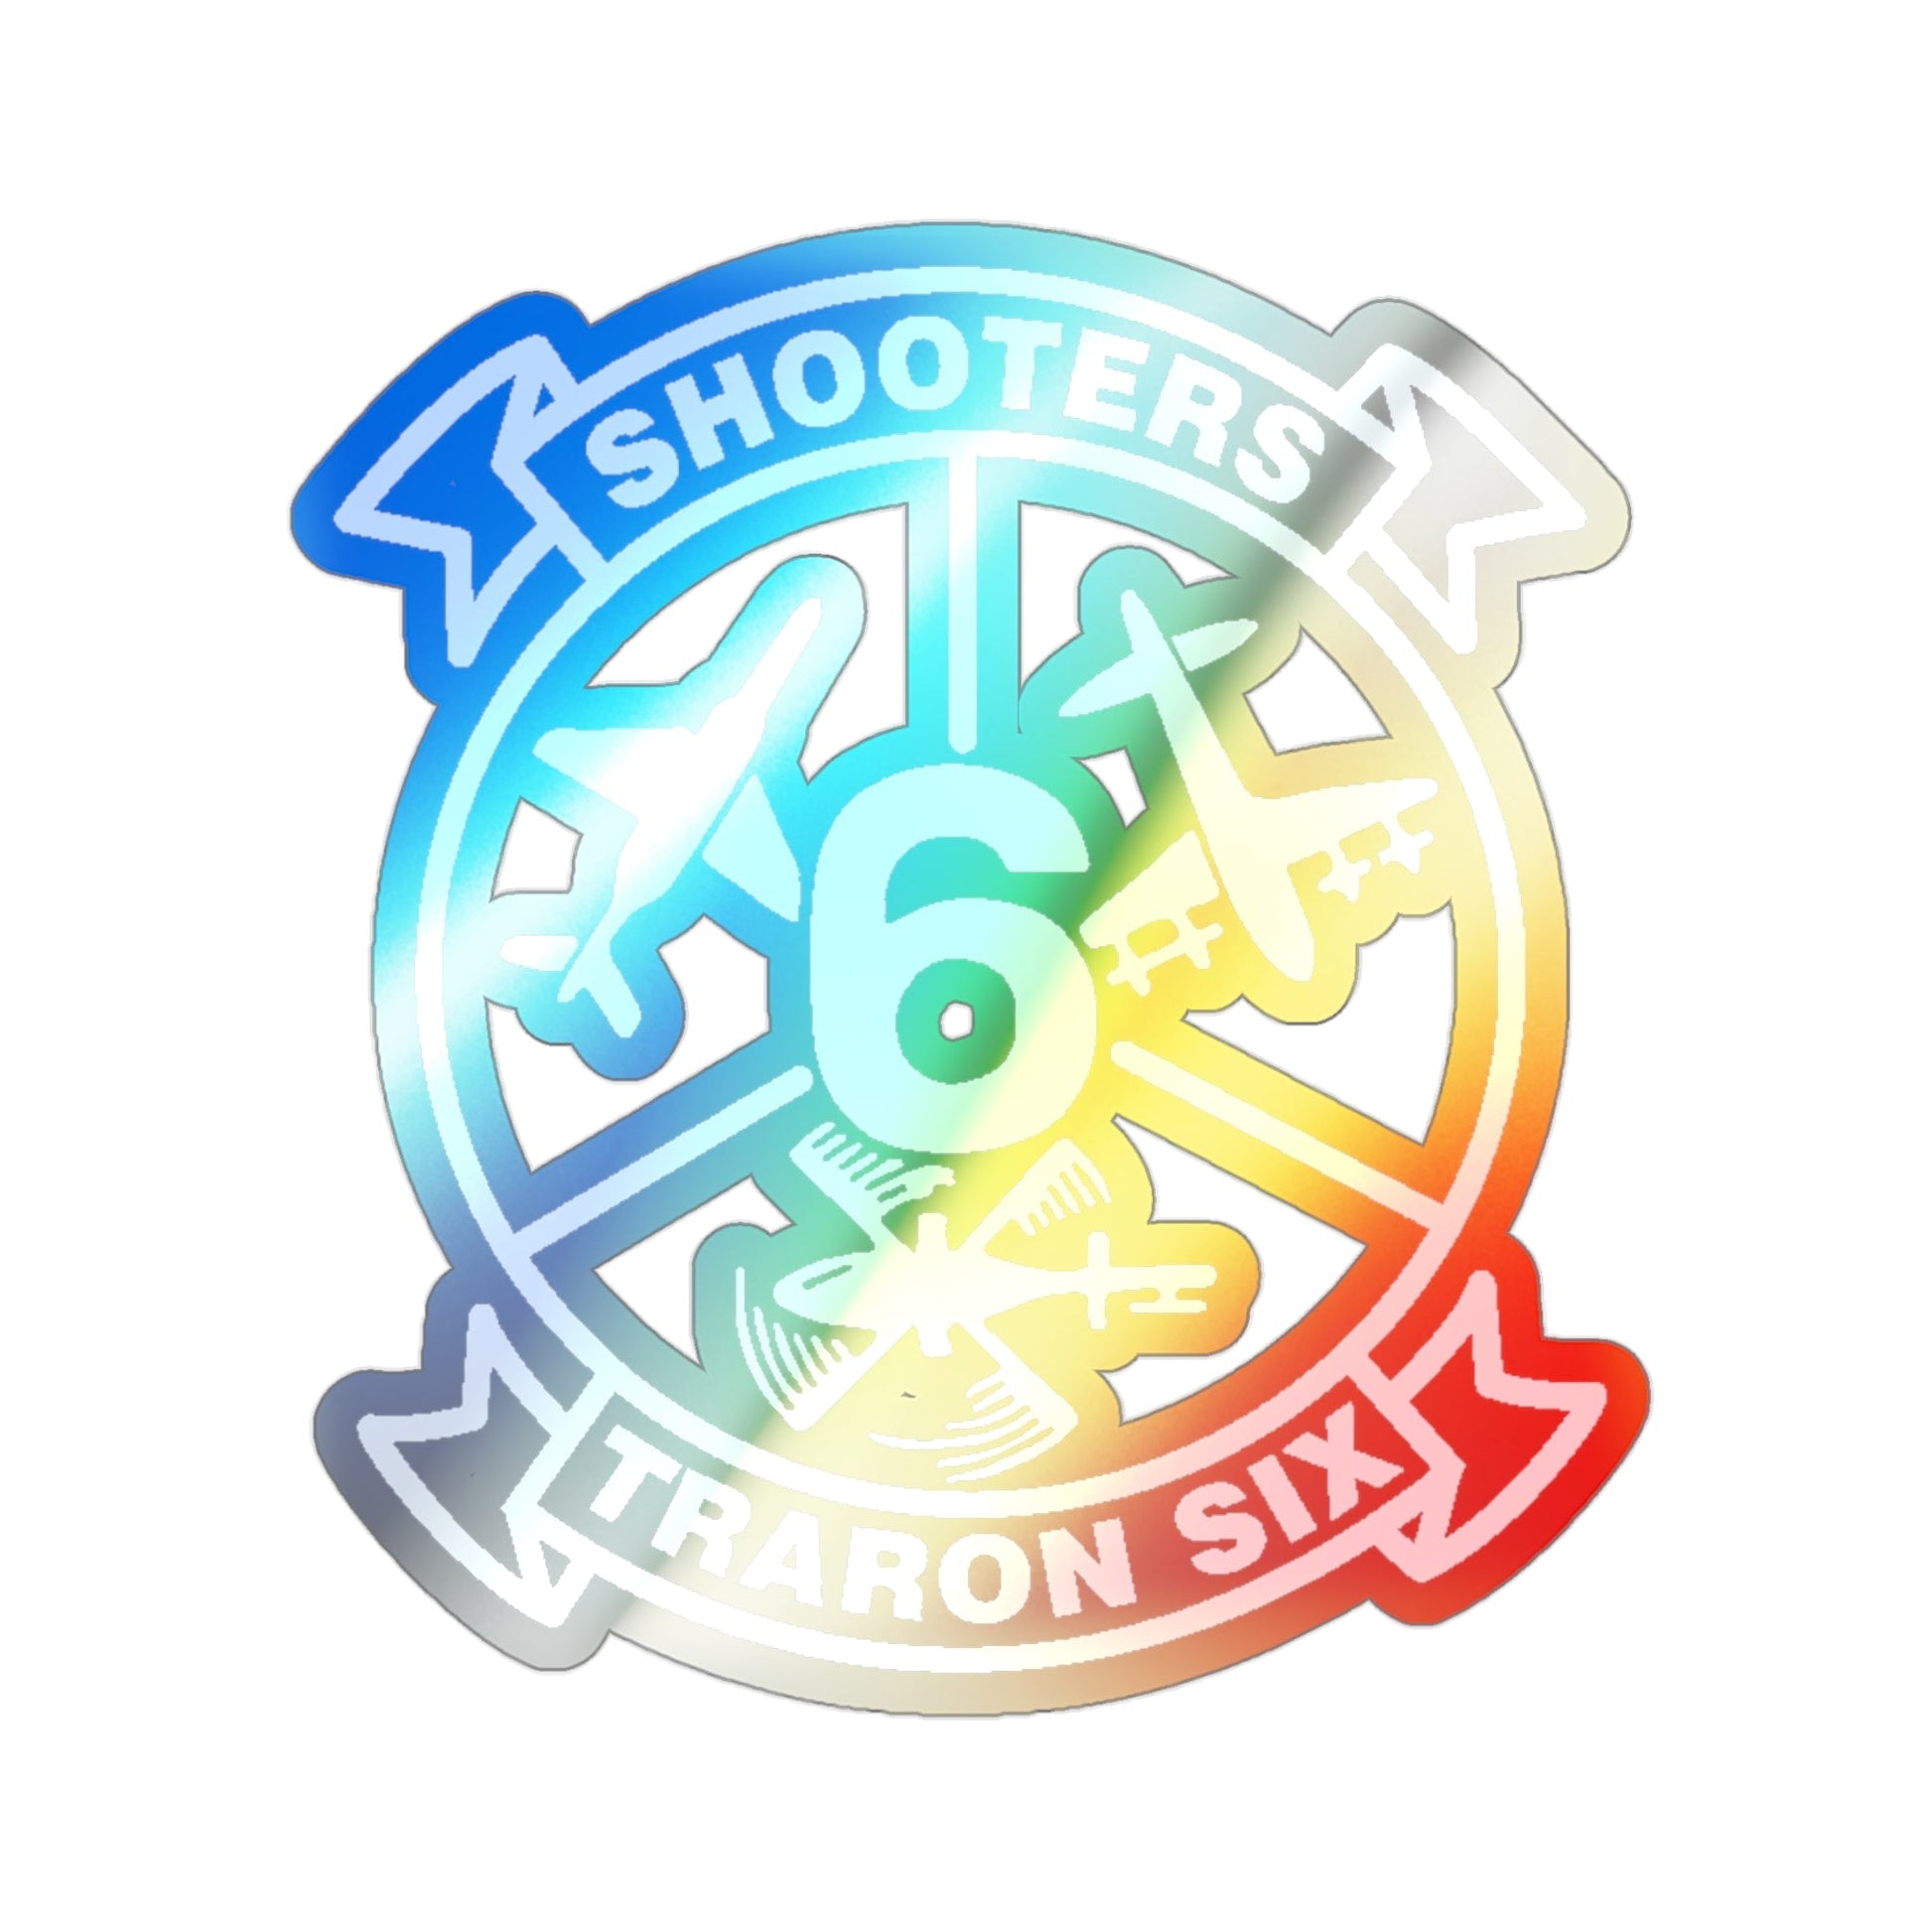 VT 6 TRARON VT6 Shooters (U.S. Navy) Holographic STICKER Die-Cut Vinyl Decal-3 Inch-The Sticker Space